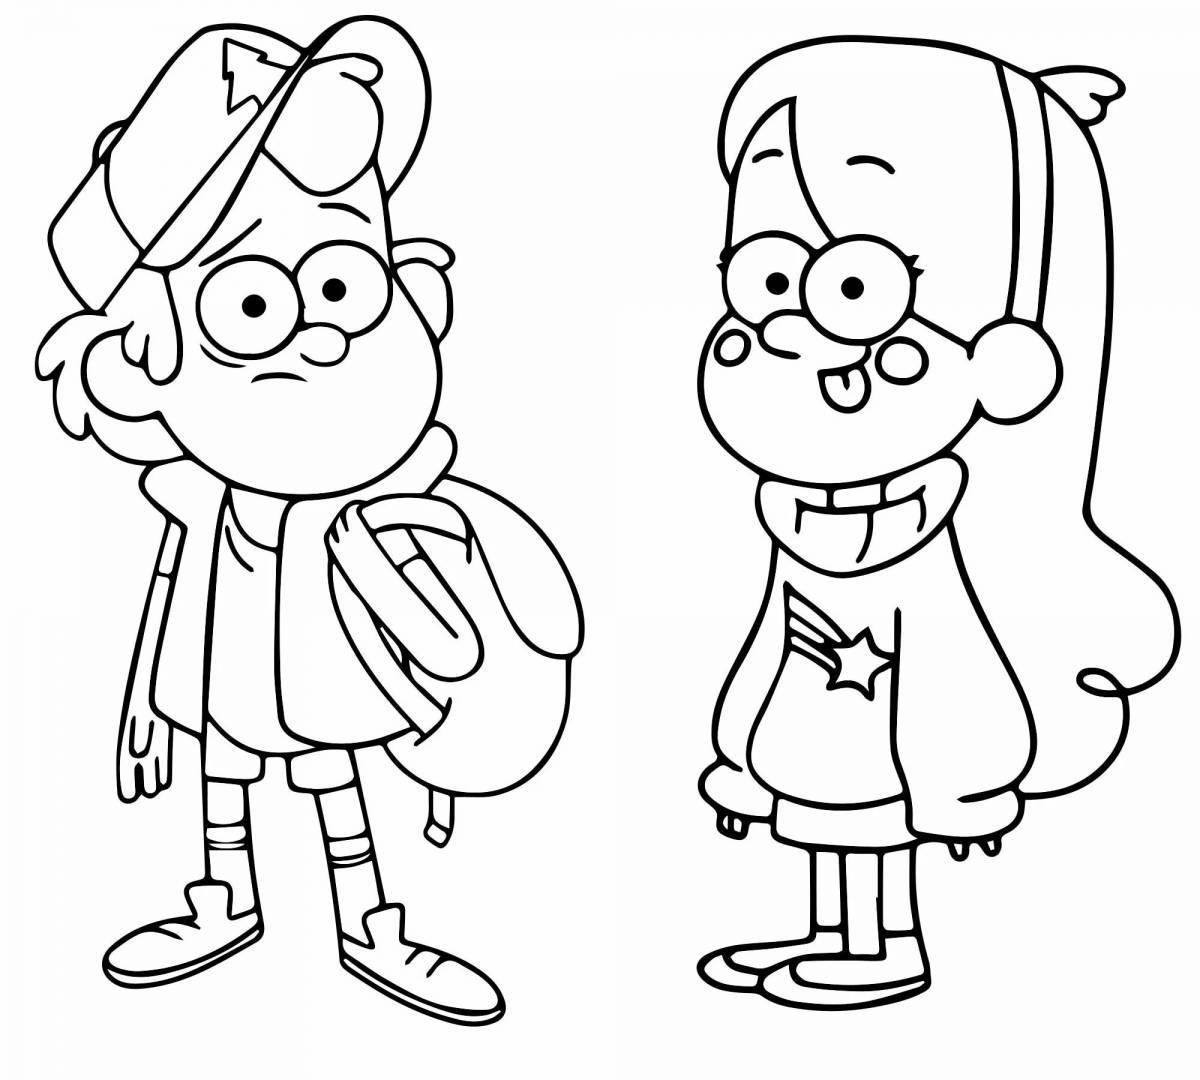 Hypnotic gravity falls everything coloring page